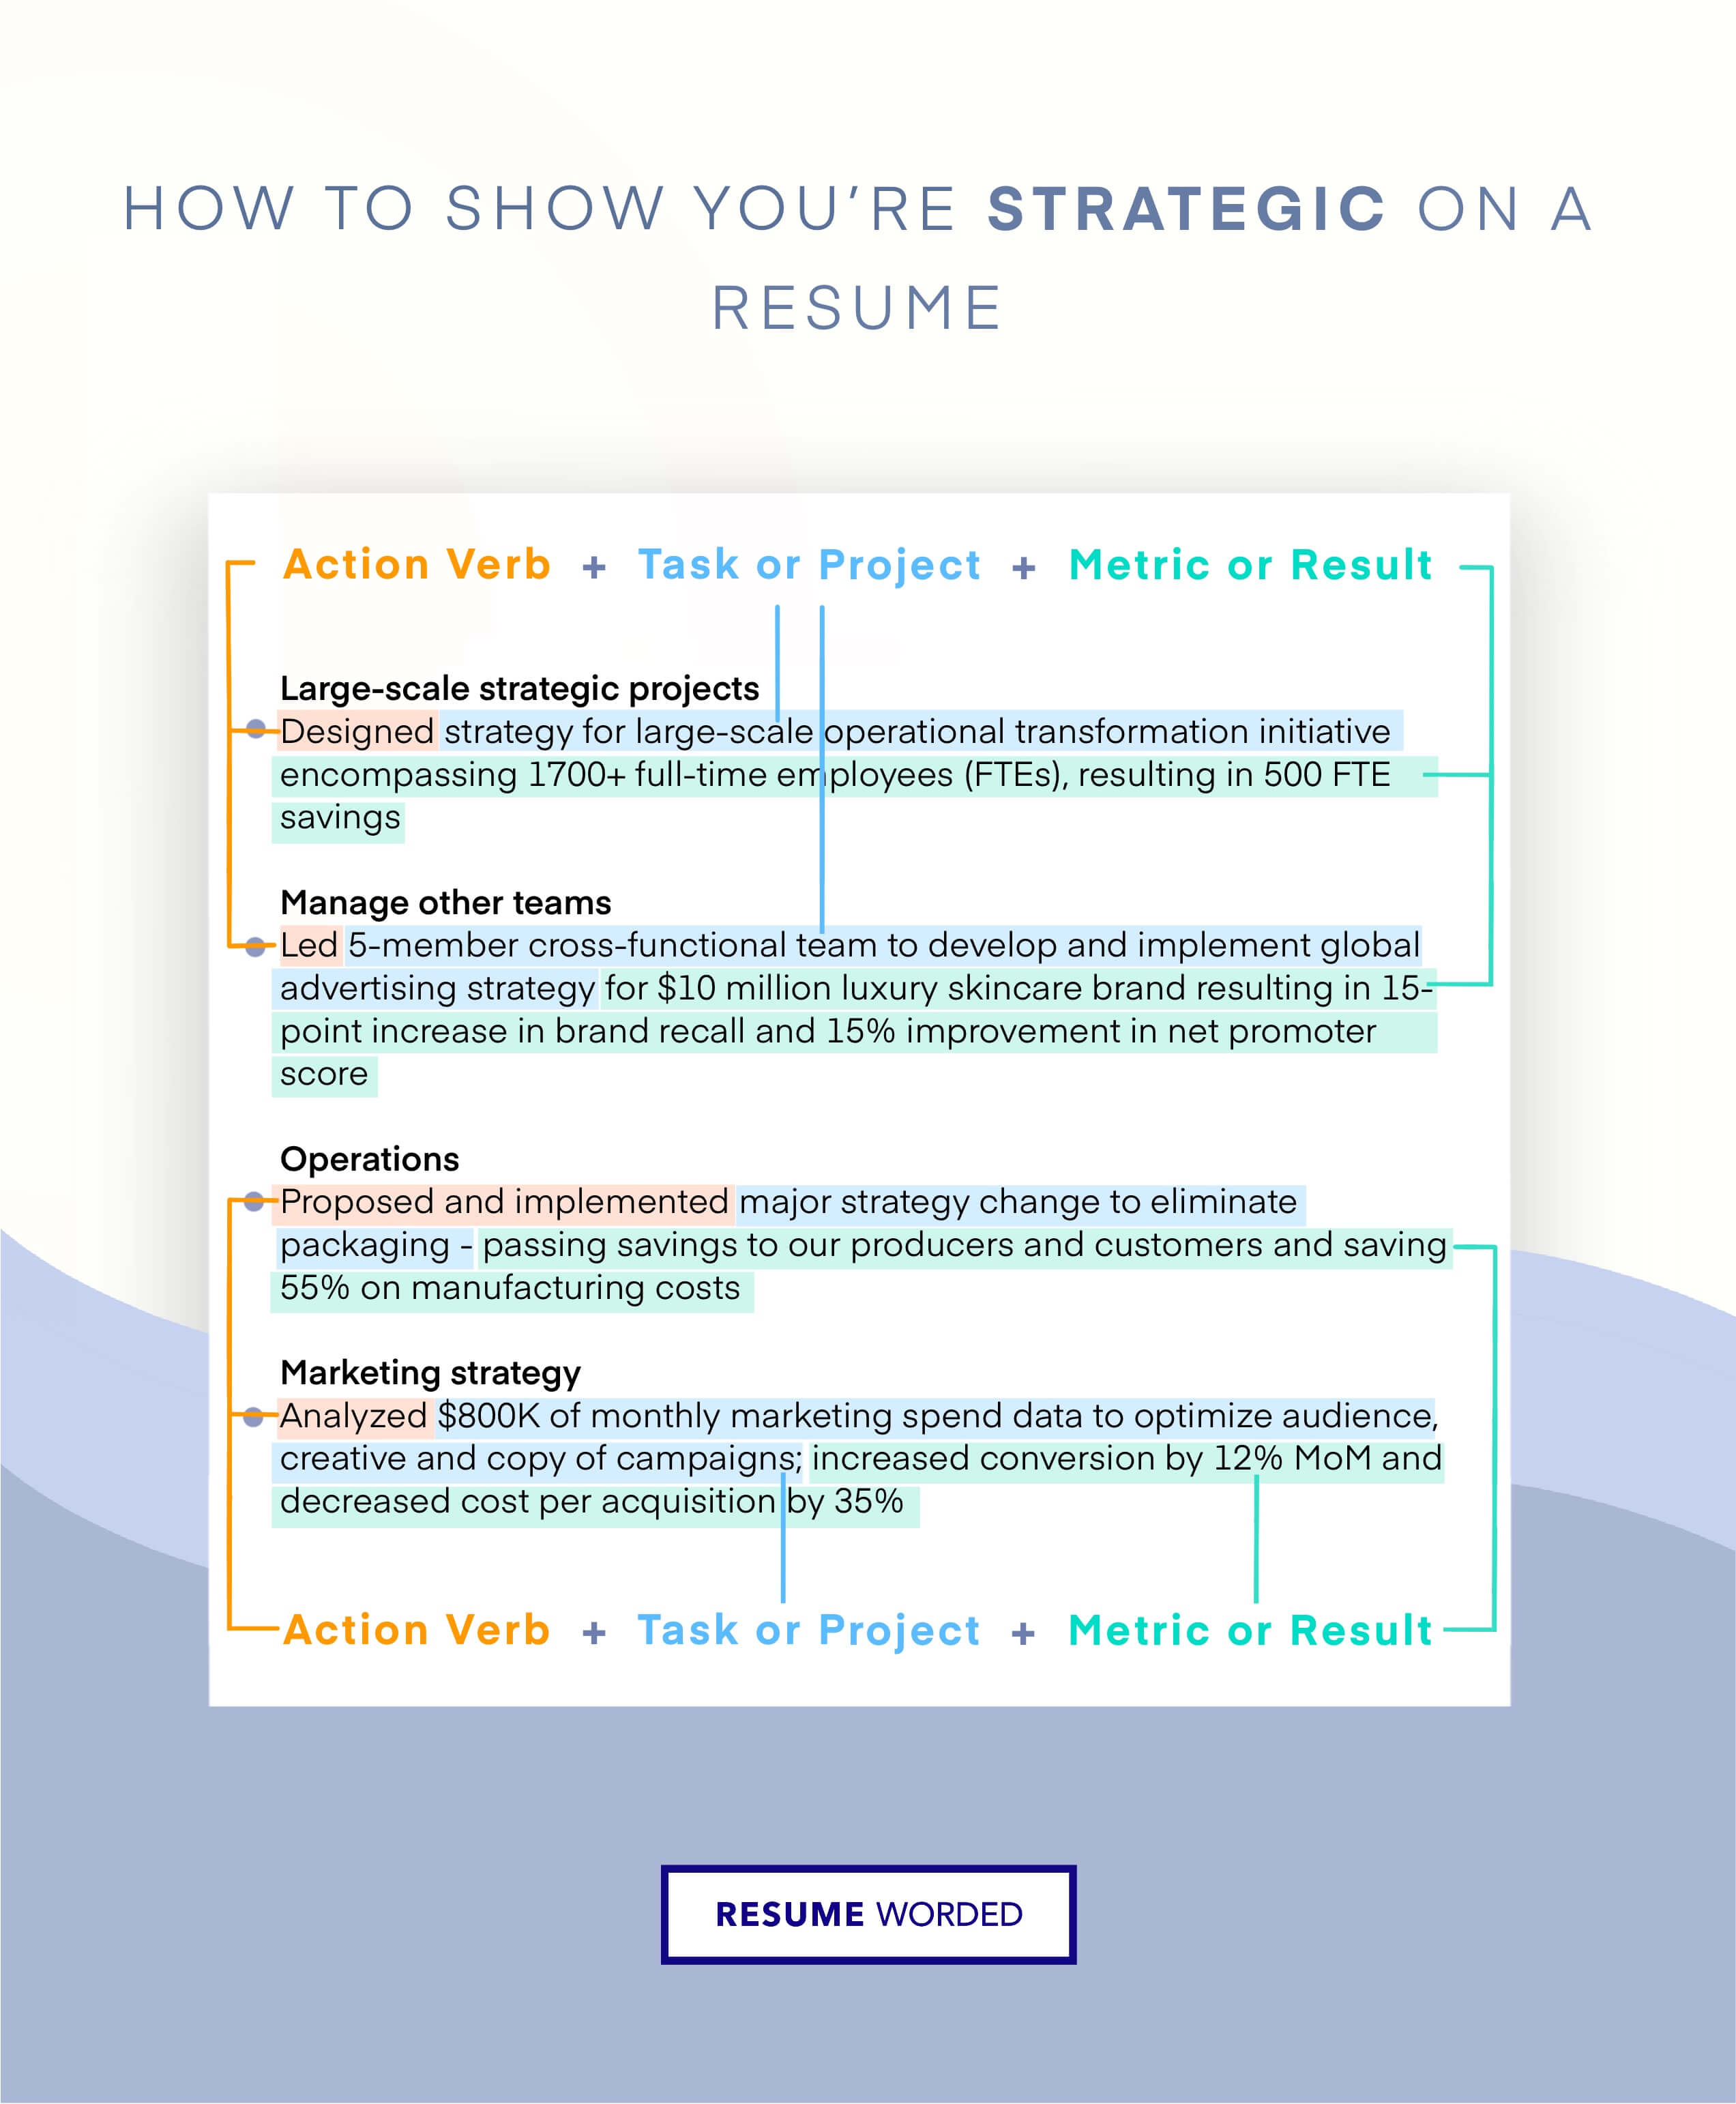 Emphasize your strategic planning skills - Vice President of Operations CV